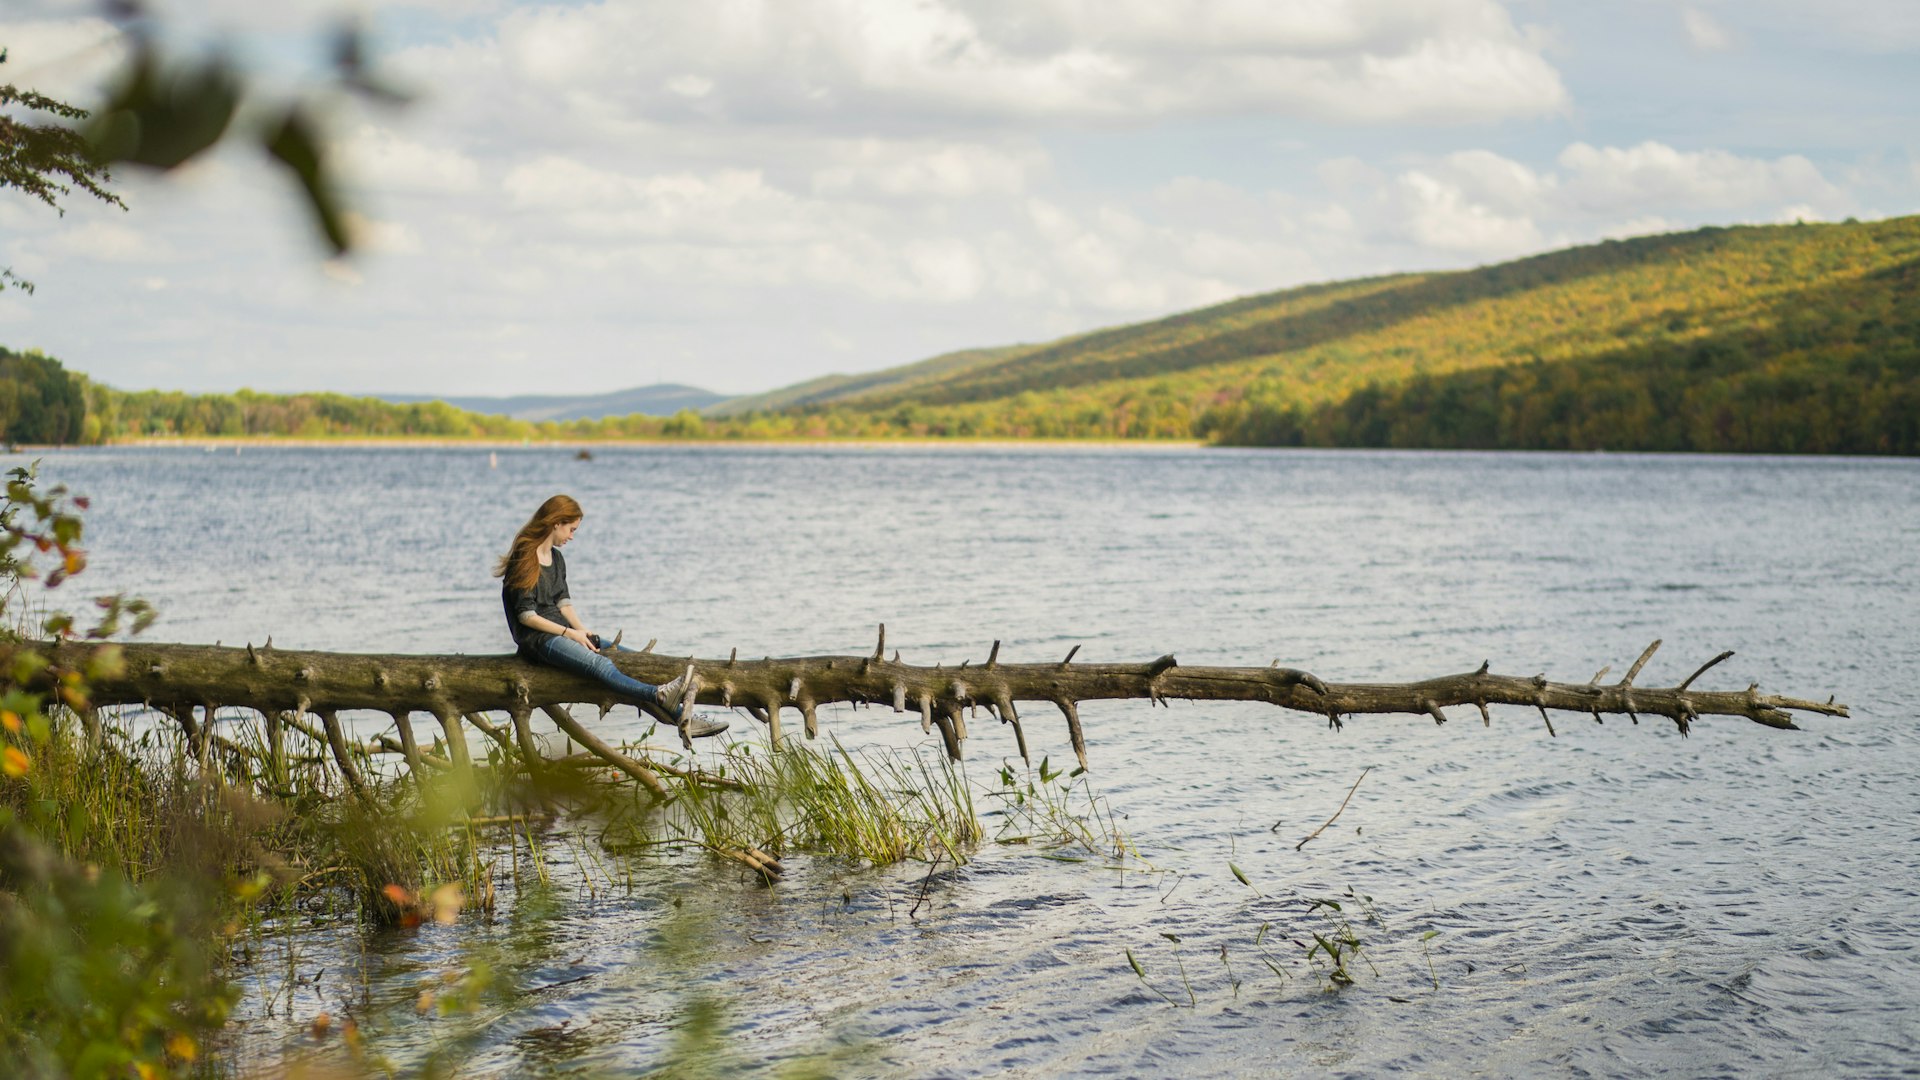 Teenager girl walking on the falled tree over the Mauch Chunk lake. The sunny autumn's day in Poconos, Pennsylvania, USA